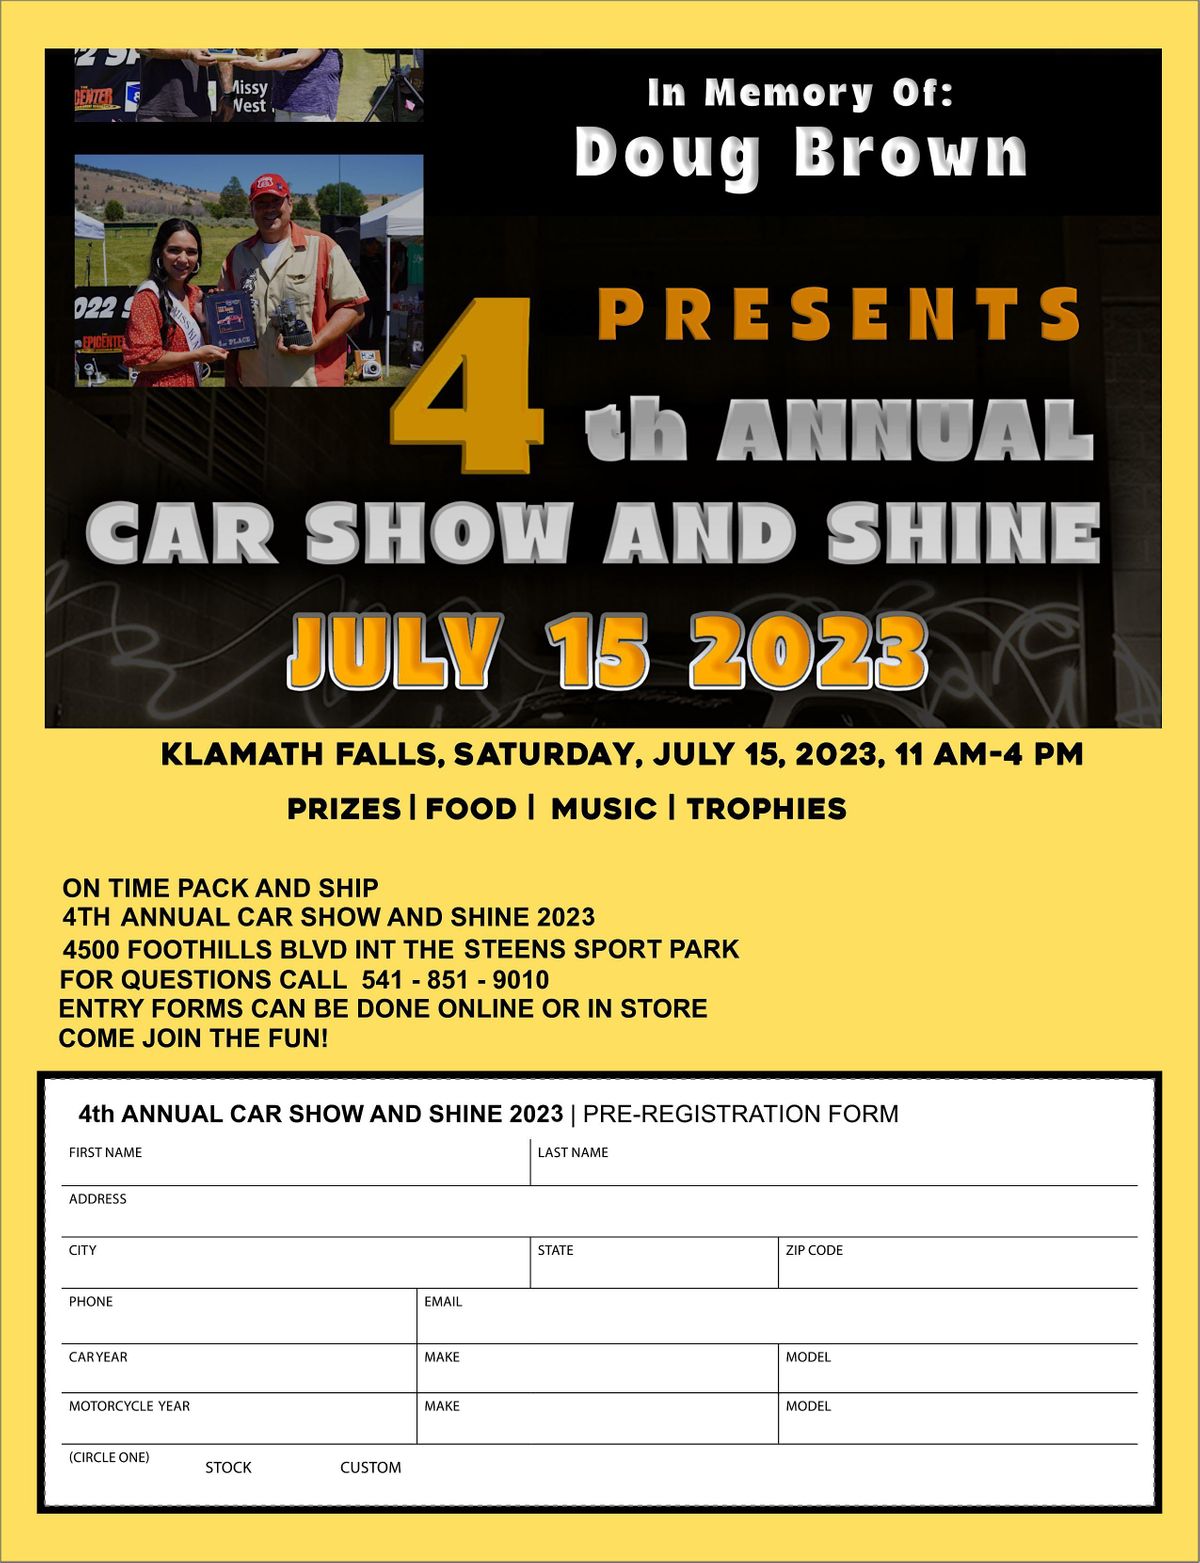 ON TIME PACK AND SHIP 4TH ANNUAL CAR SHOW AND SHINE 4500 Foothills